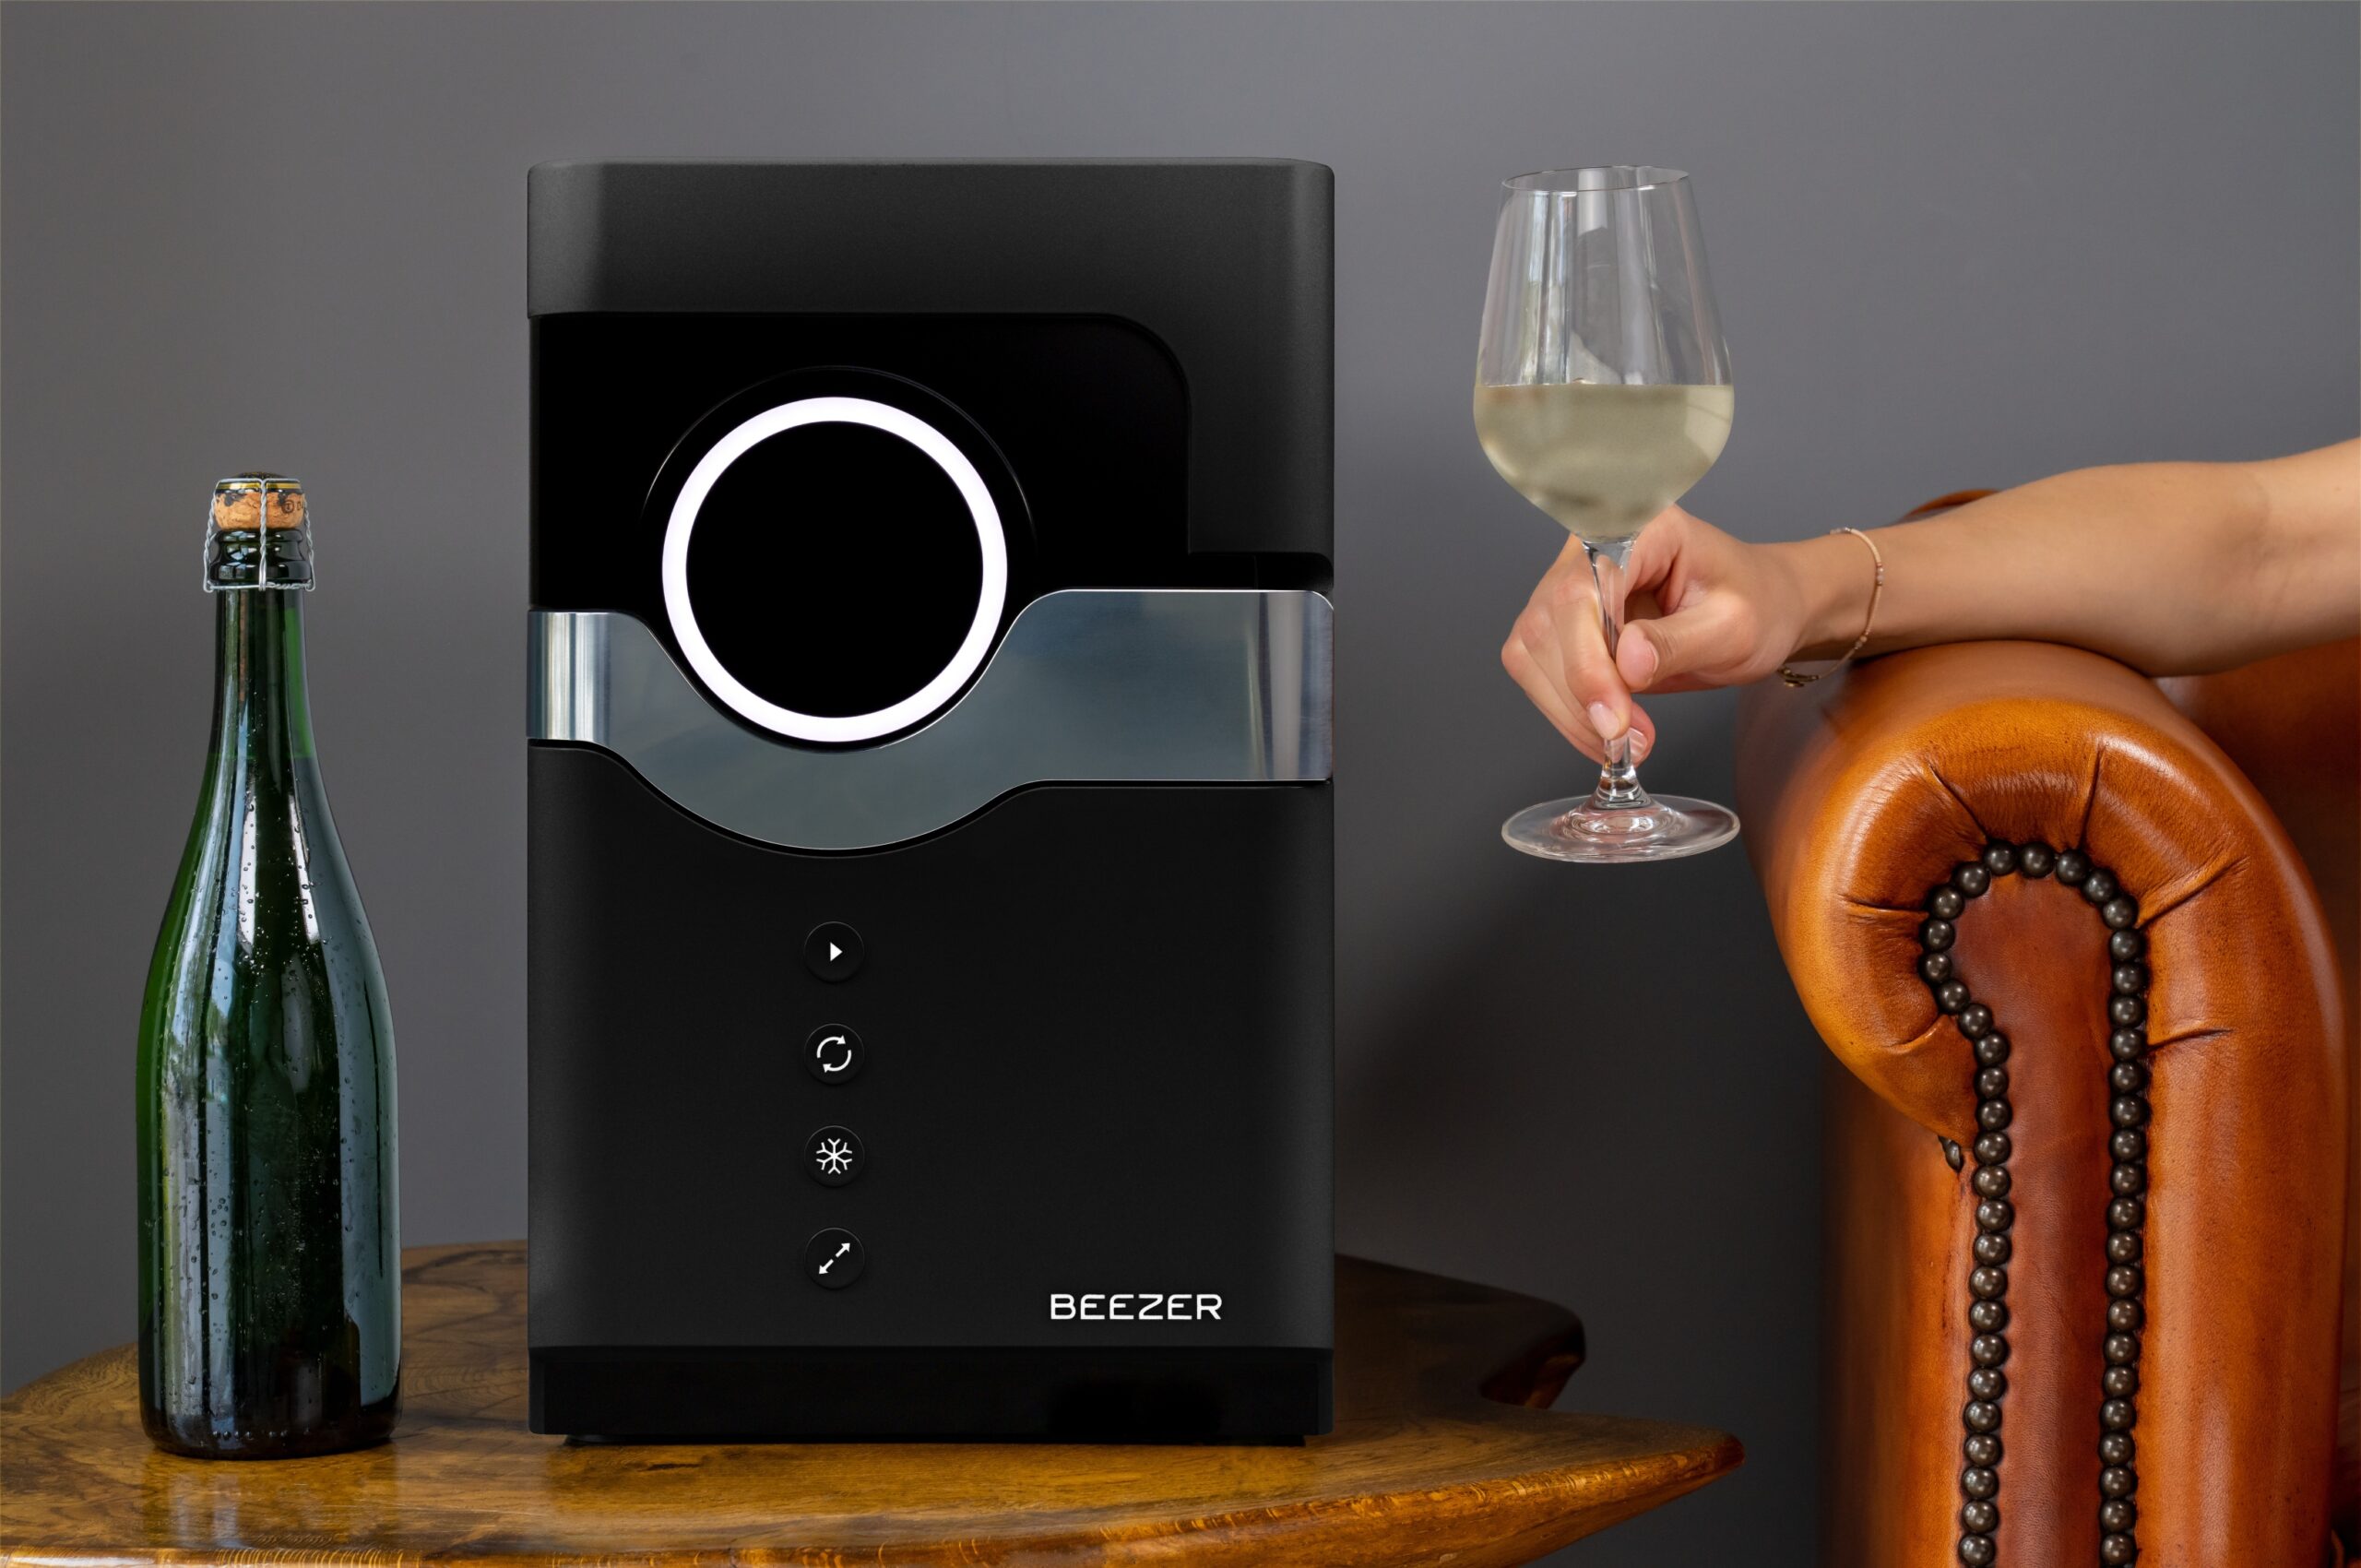 BEEZER uses latest air cooling technology to chill drinks 10times faster than standard freezers